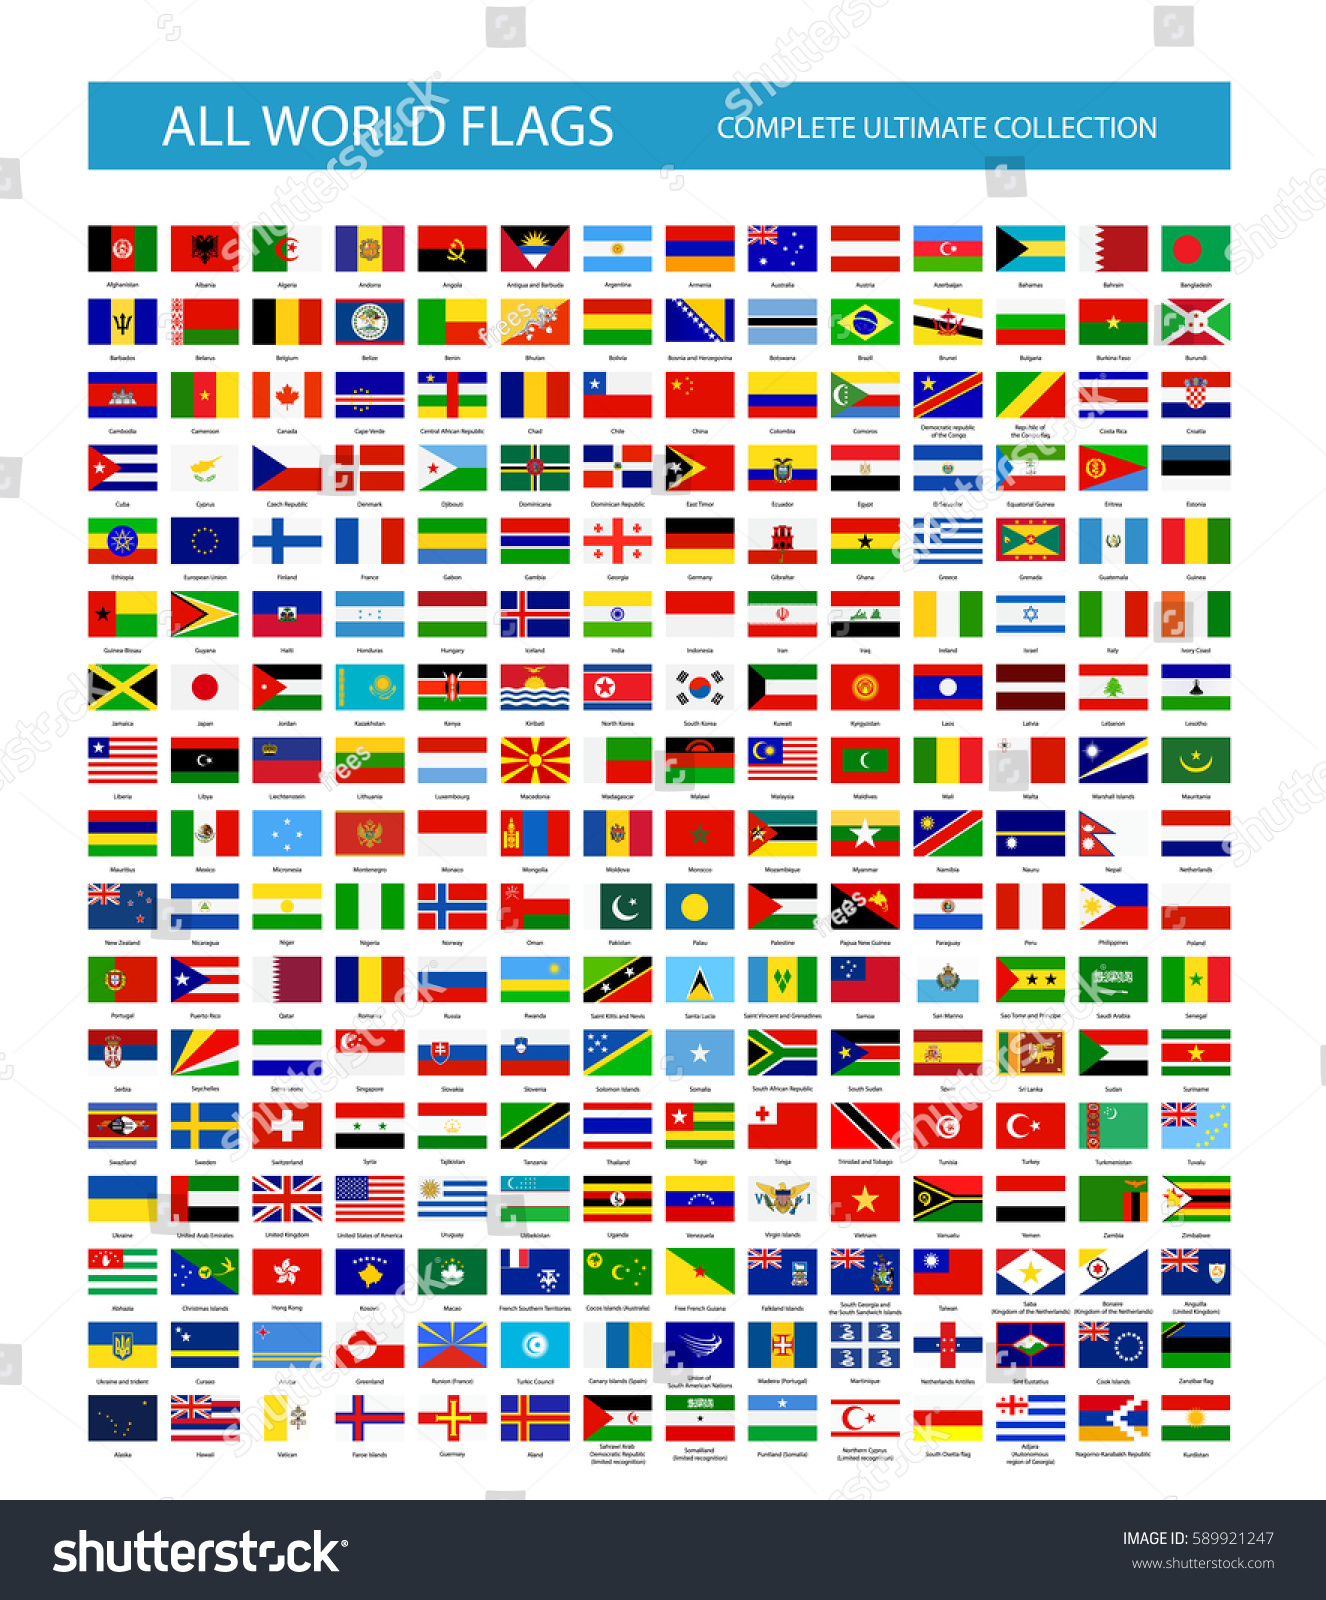 All Vector World Country Flags. All flags are organized by layers with each flag on a single layer properly named. #589921247